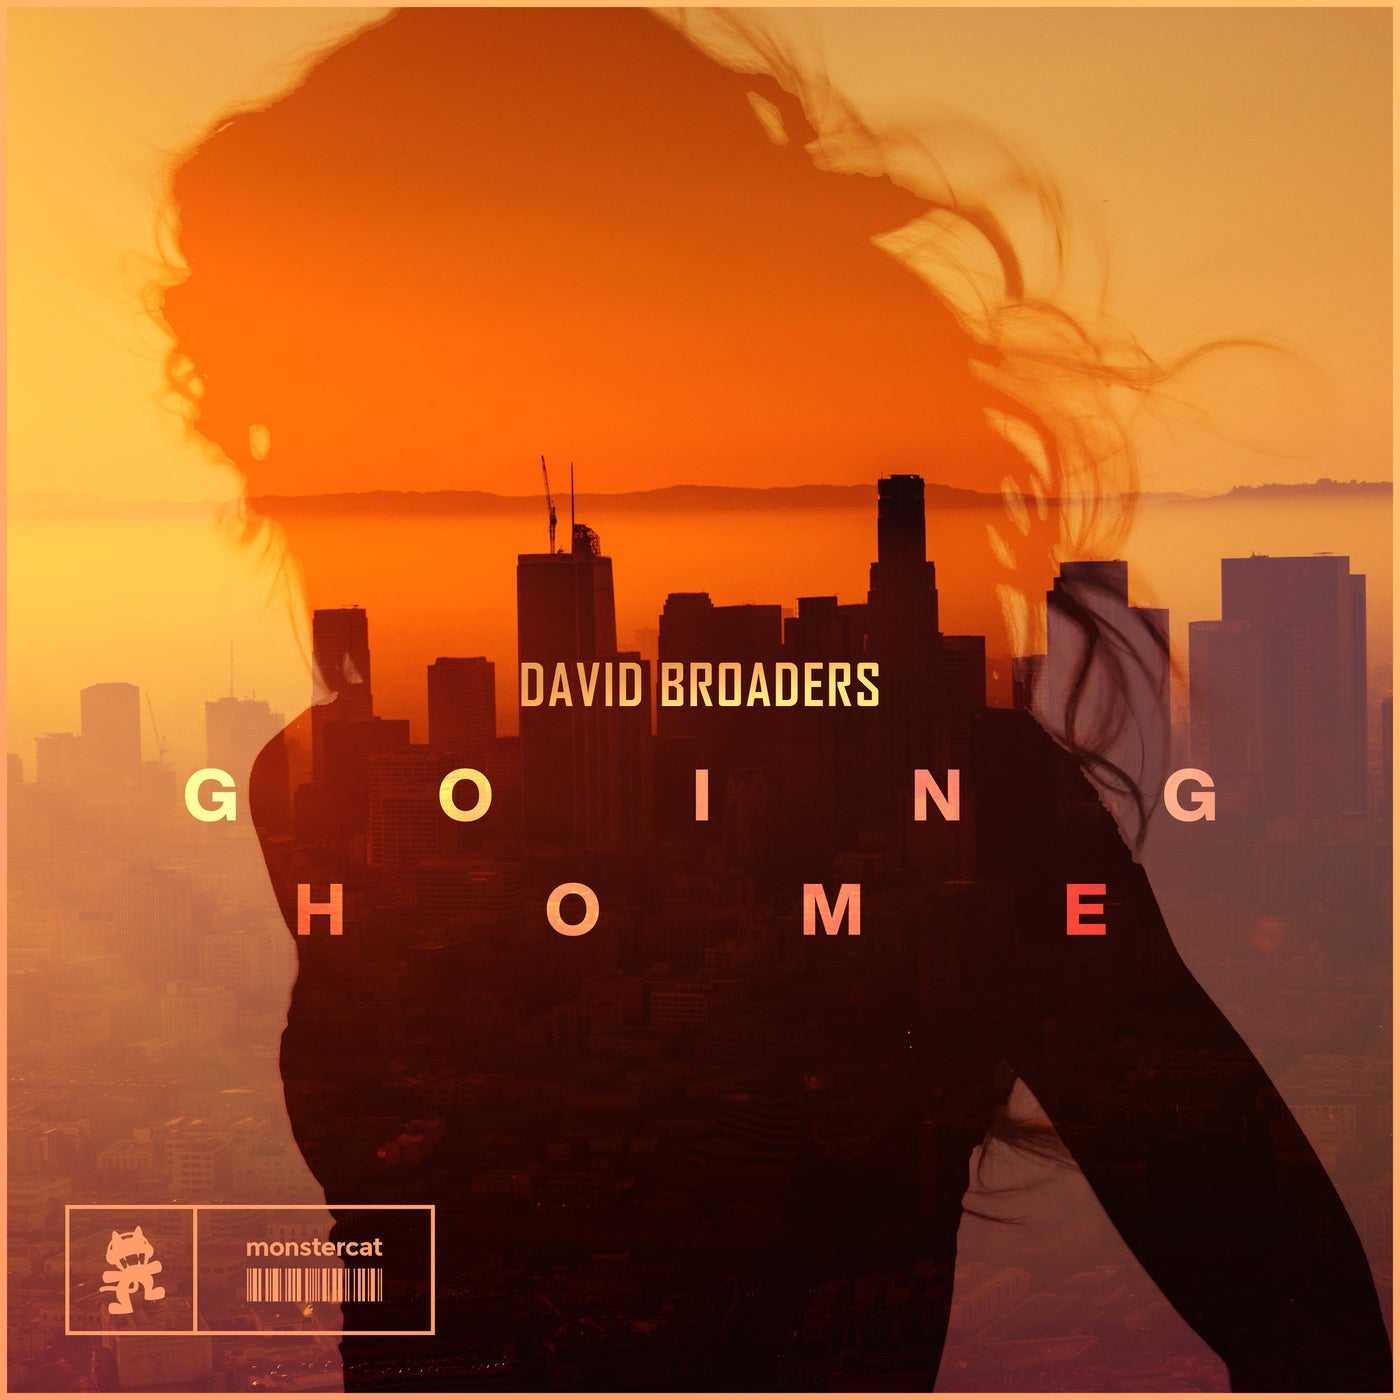 Going home music. David broaders. Broaders. Going Home.